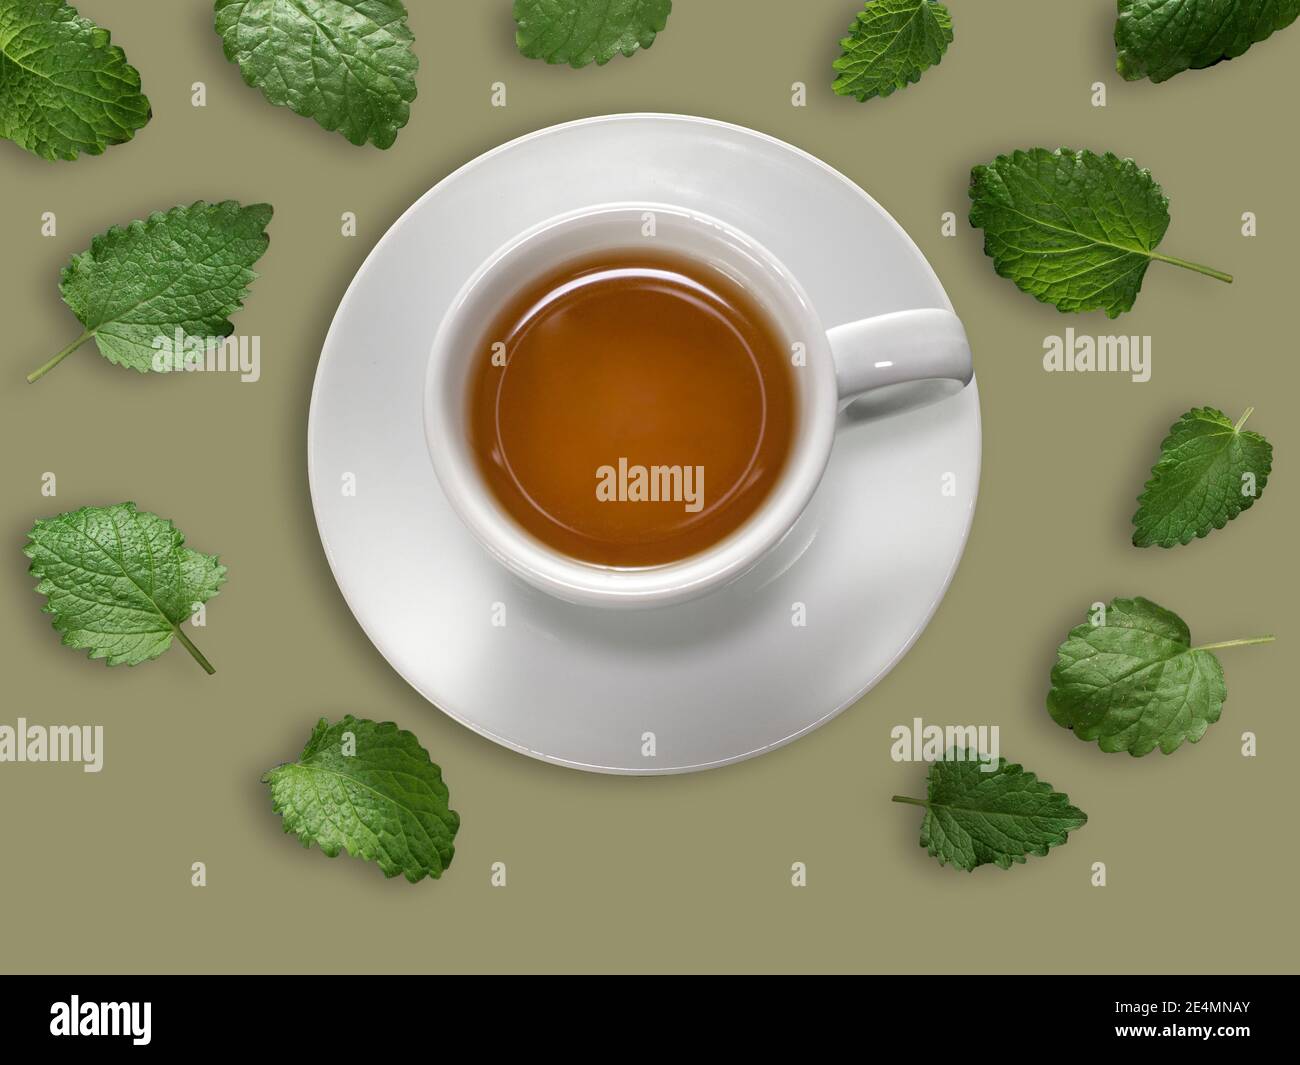 White cup of mint tea with meant leaves on green background. Overhead shot. Stock Photo